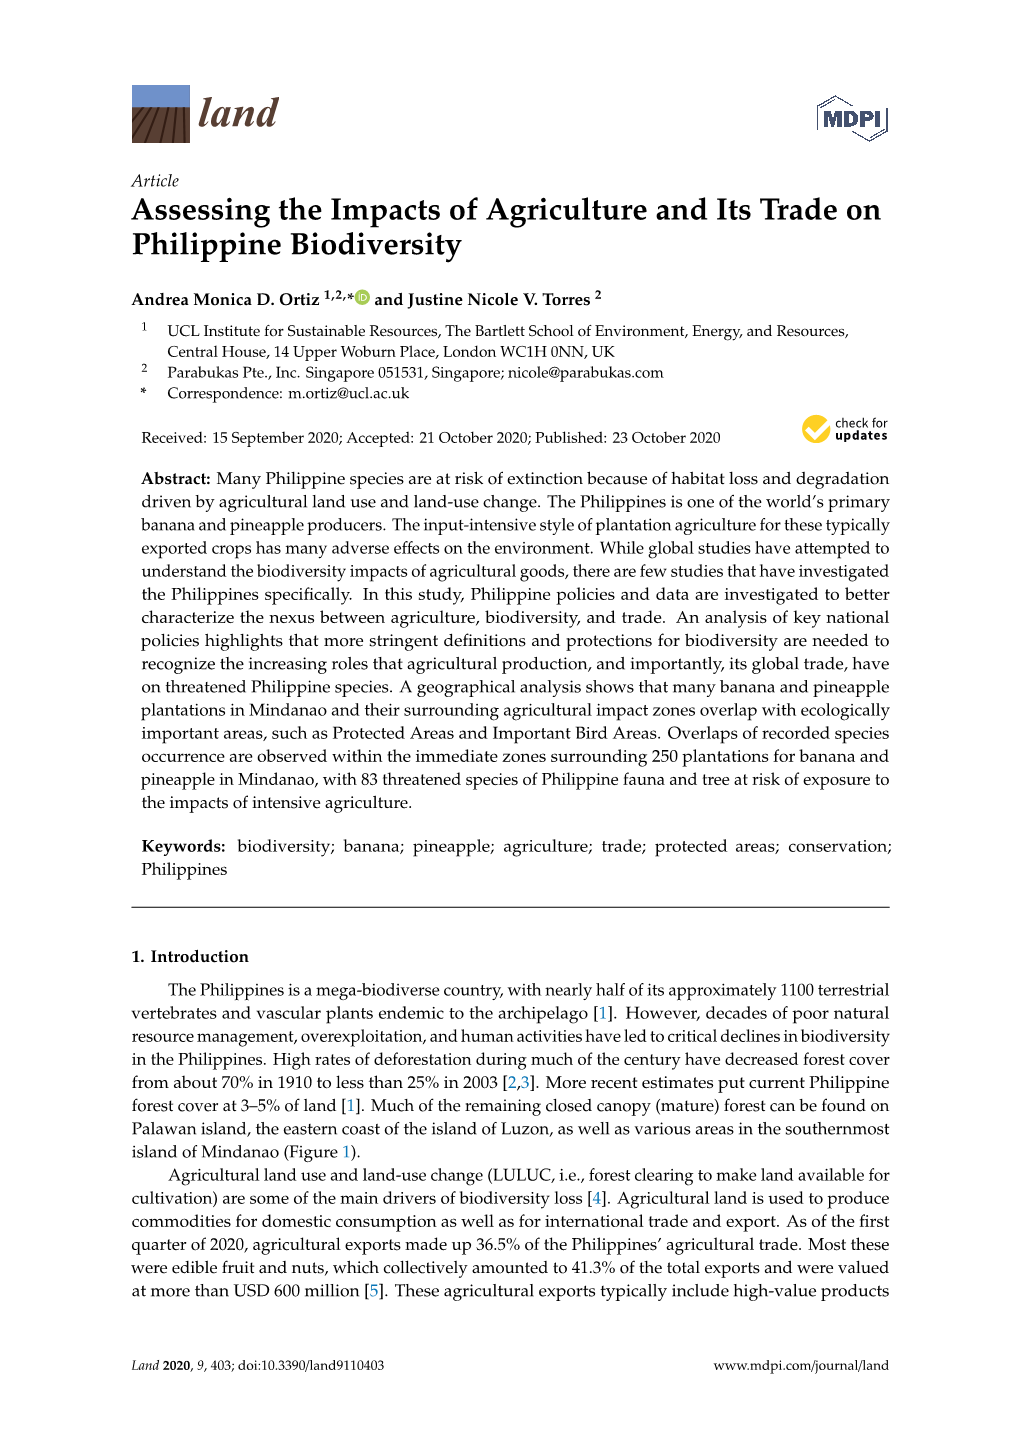 Assessing the Impacts of Agriculture and Its Trade on Philippine Biodiversity